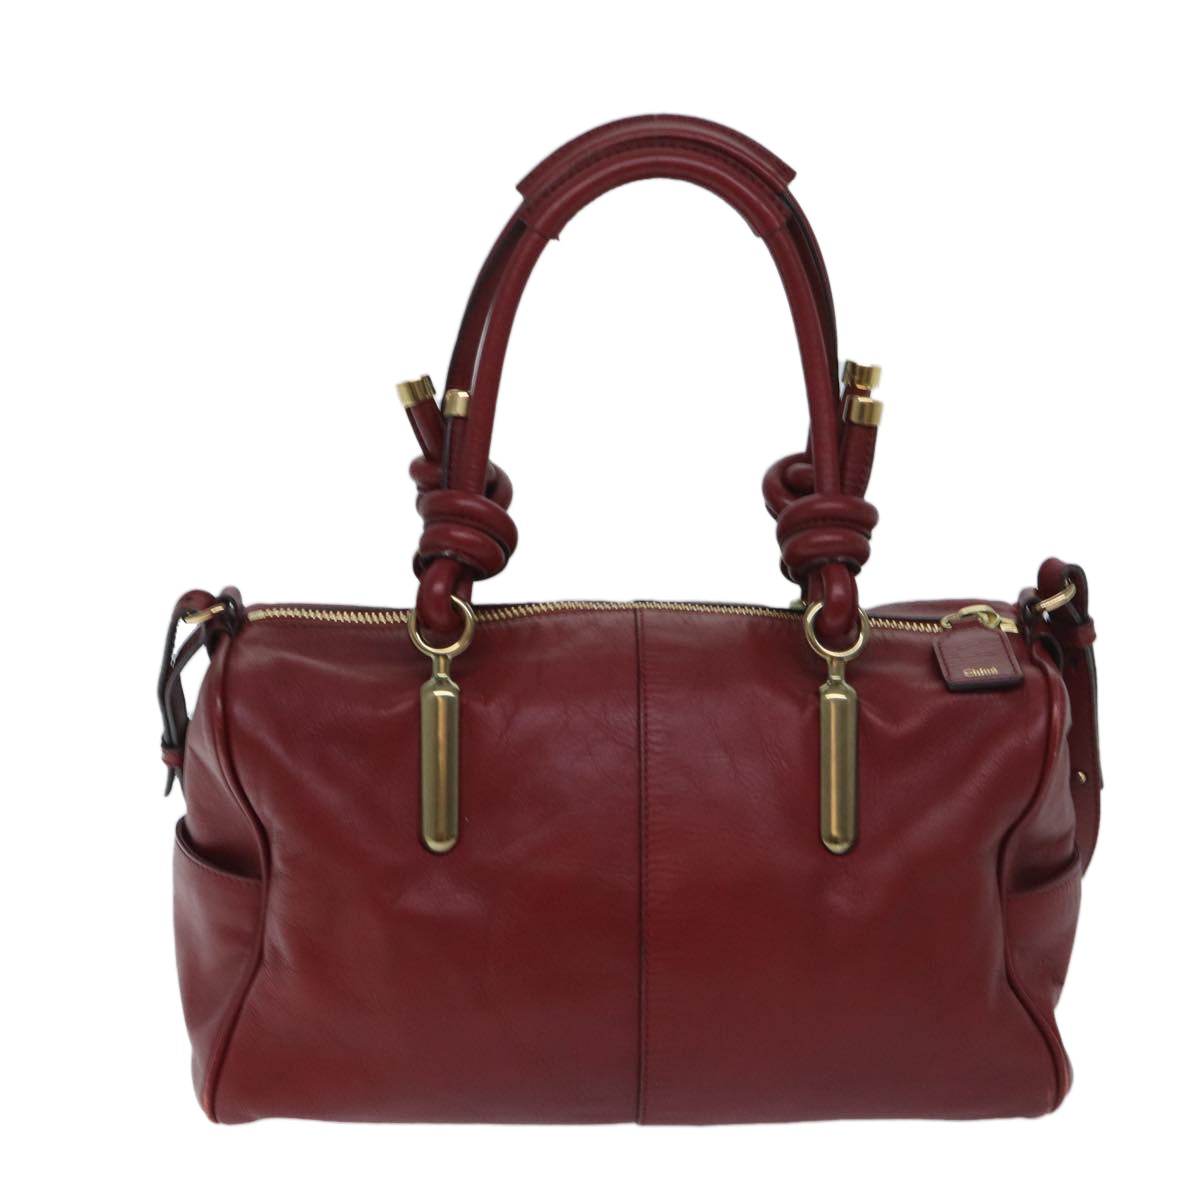 Chloe Hand Bag Leather 2way Red Auth yk11417 - 0